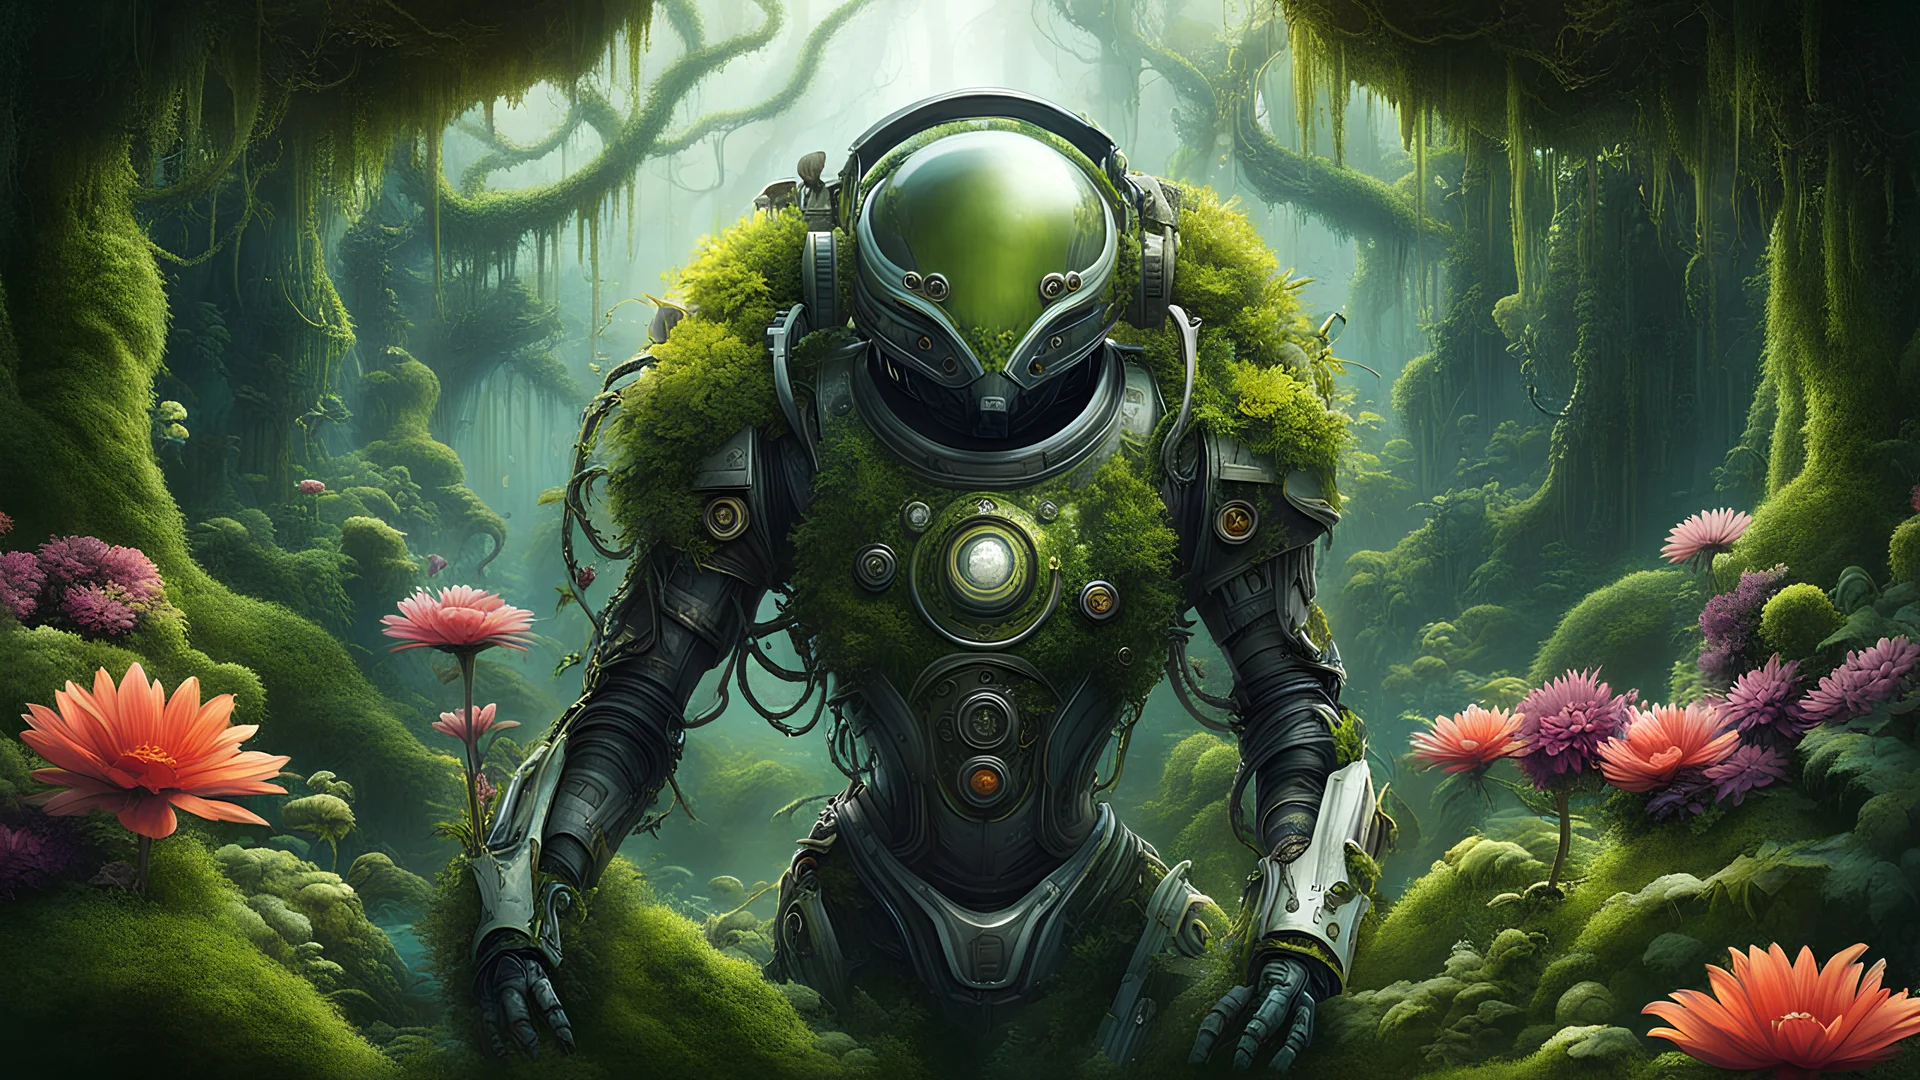 illustration-style picture of a biomechanical entity. The entity is a fusion of technology and nature, with a helmet that resembles a diving suit, its surface covered in verdant moss, handing a flower to viewer, twisting vines, and bright, exotic flowers. Its arms are heavy and robotic, adorned with peaceful symbols and patterns. The backdrop is an enchanted swamp, filled with a mystical fog, gnarly trees, and a spectrum of swamp flora. Fireflies dot the air with their luminescent glow.